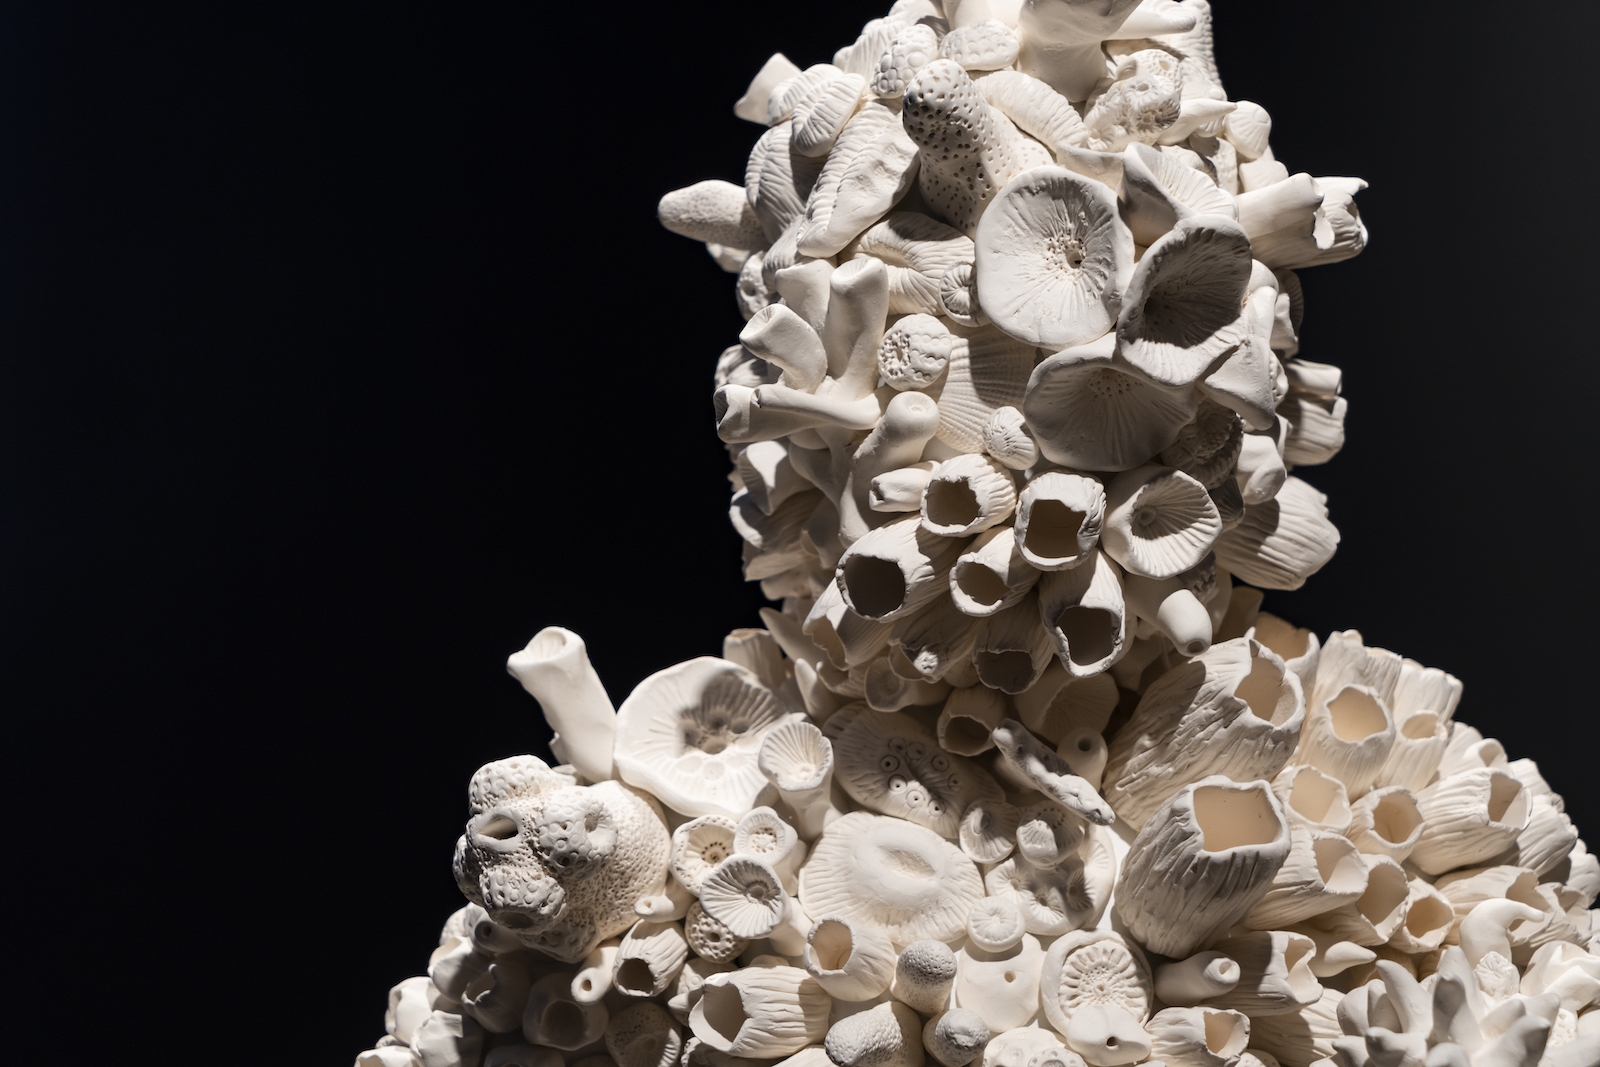 A close up shows a semi-human form covered in white porcelain coral shapes